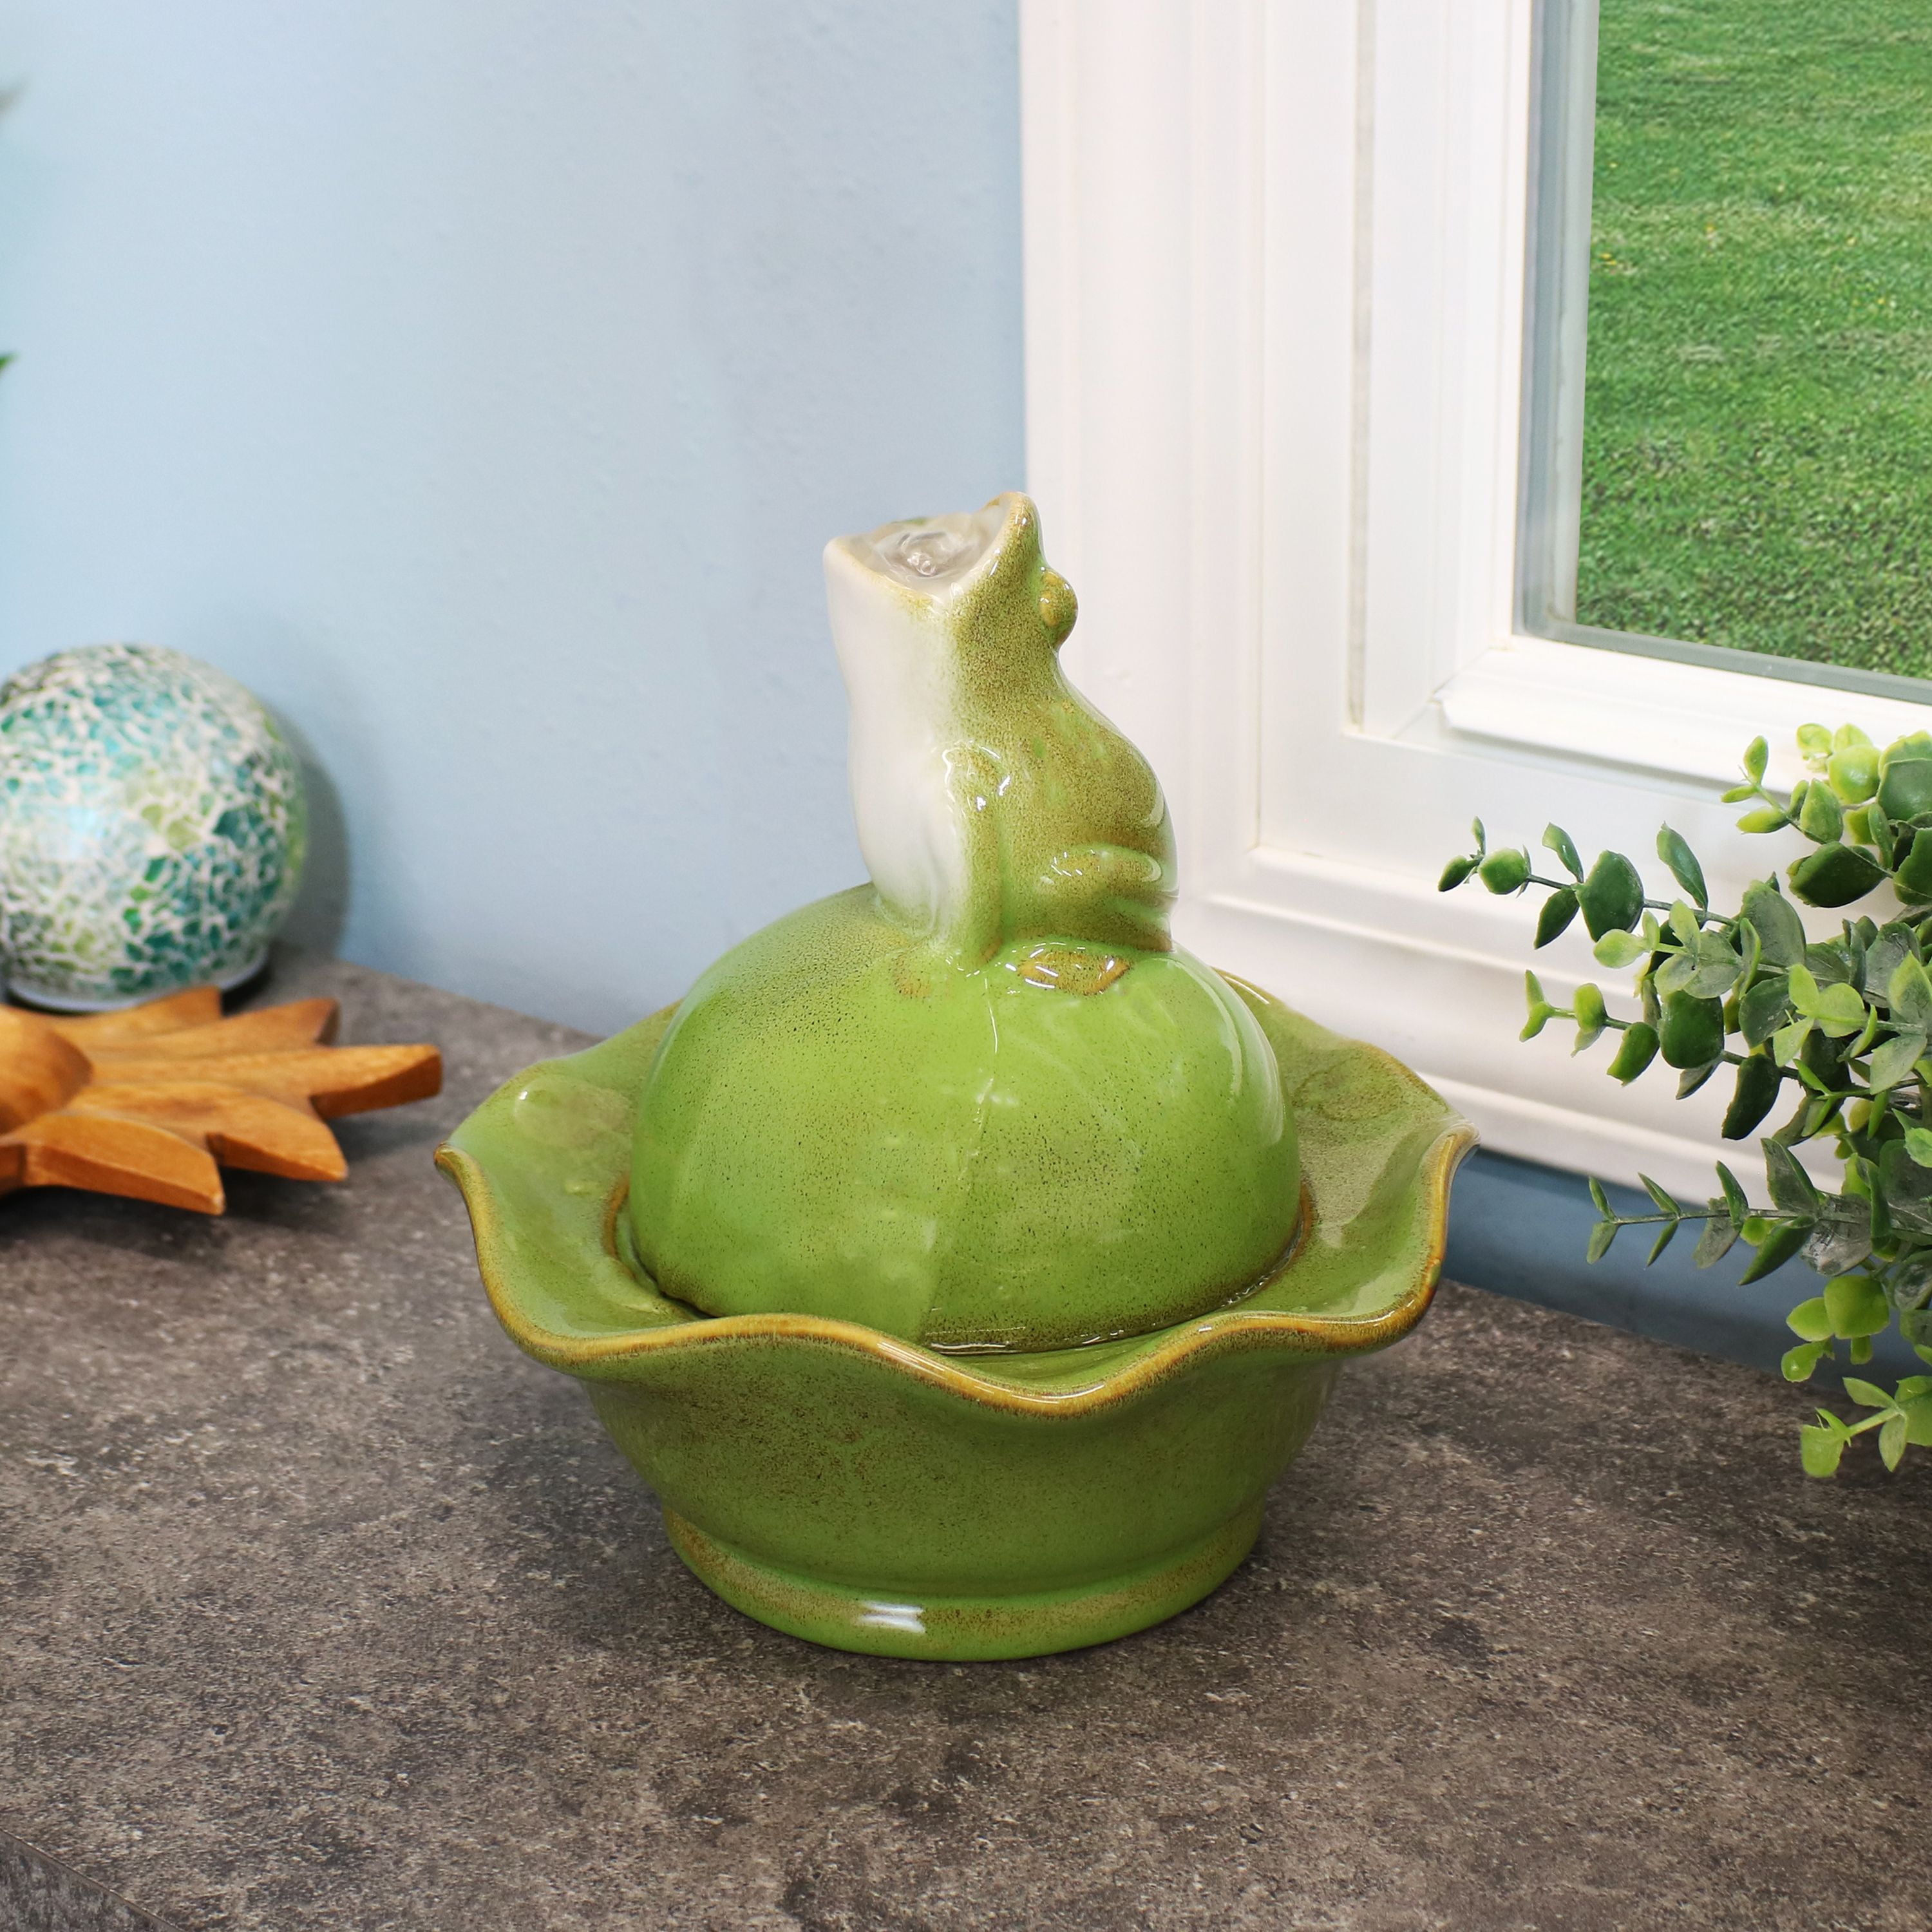 Sunnydaze Indoor Tabletop Fountain w/ Green Ceramic Frog Water Feature